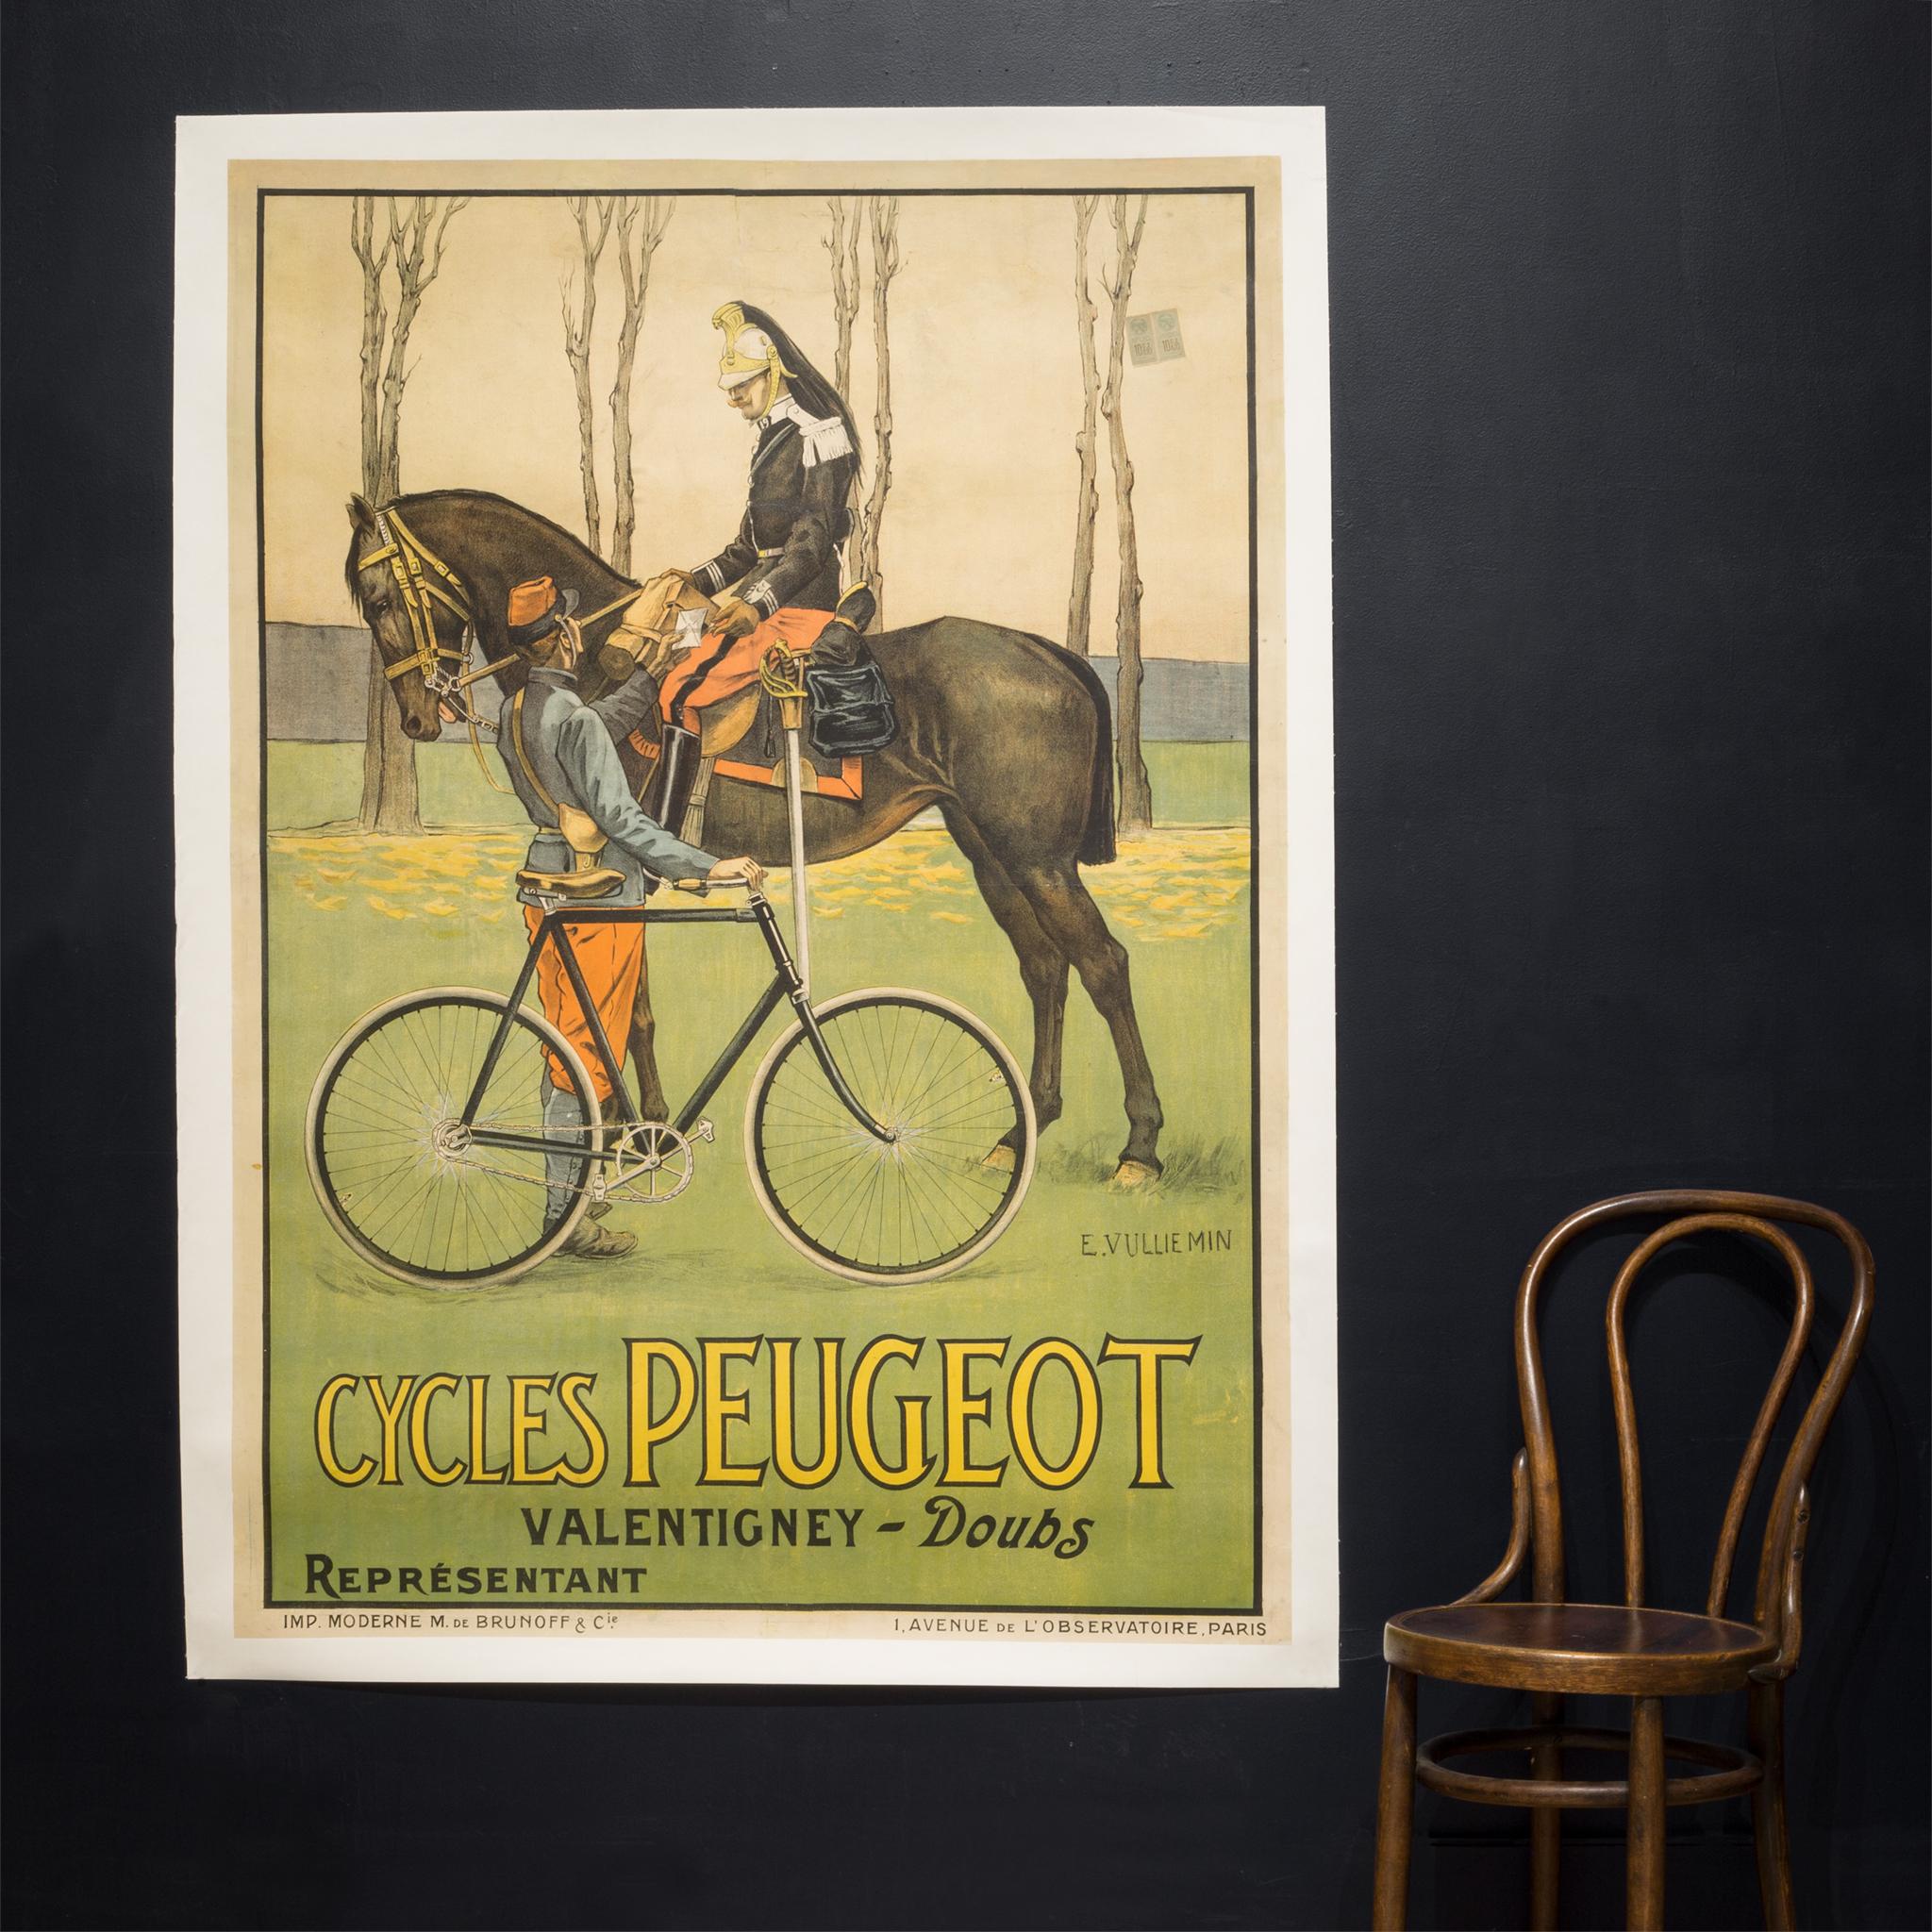 About

This is an original French army lithograph poster. A rare poster with proof of tax stamps that advertisers had to pay in order to hire the public space. This poster is not a reproduction. It is conservation mounted, linen backed, and in